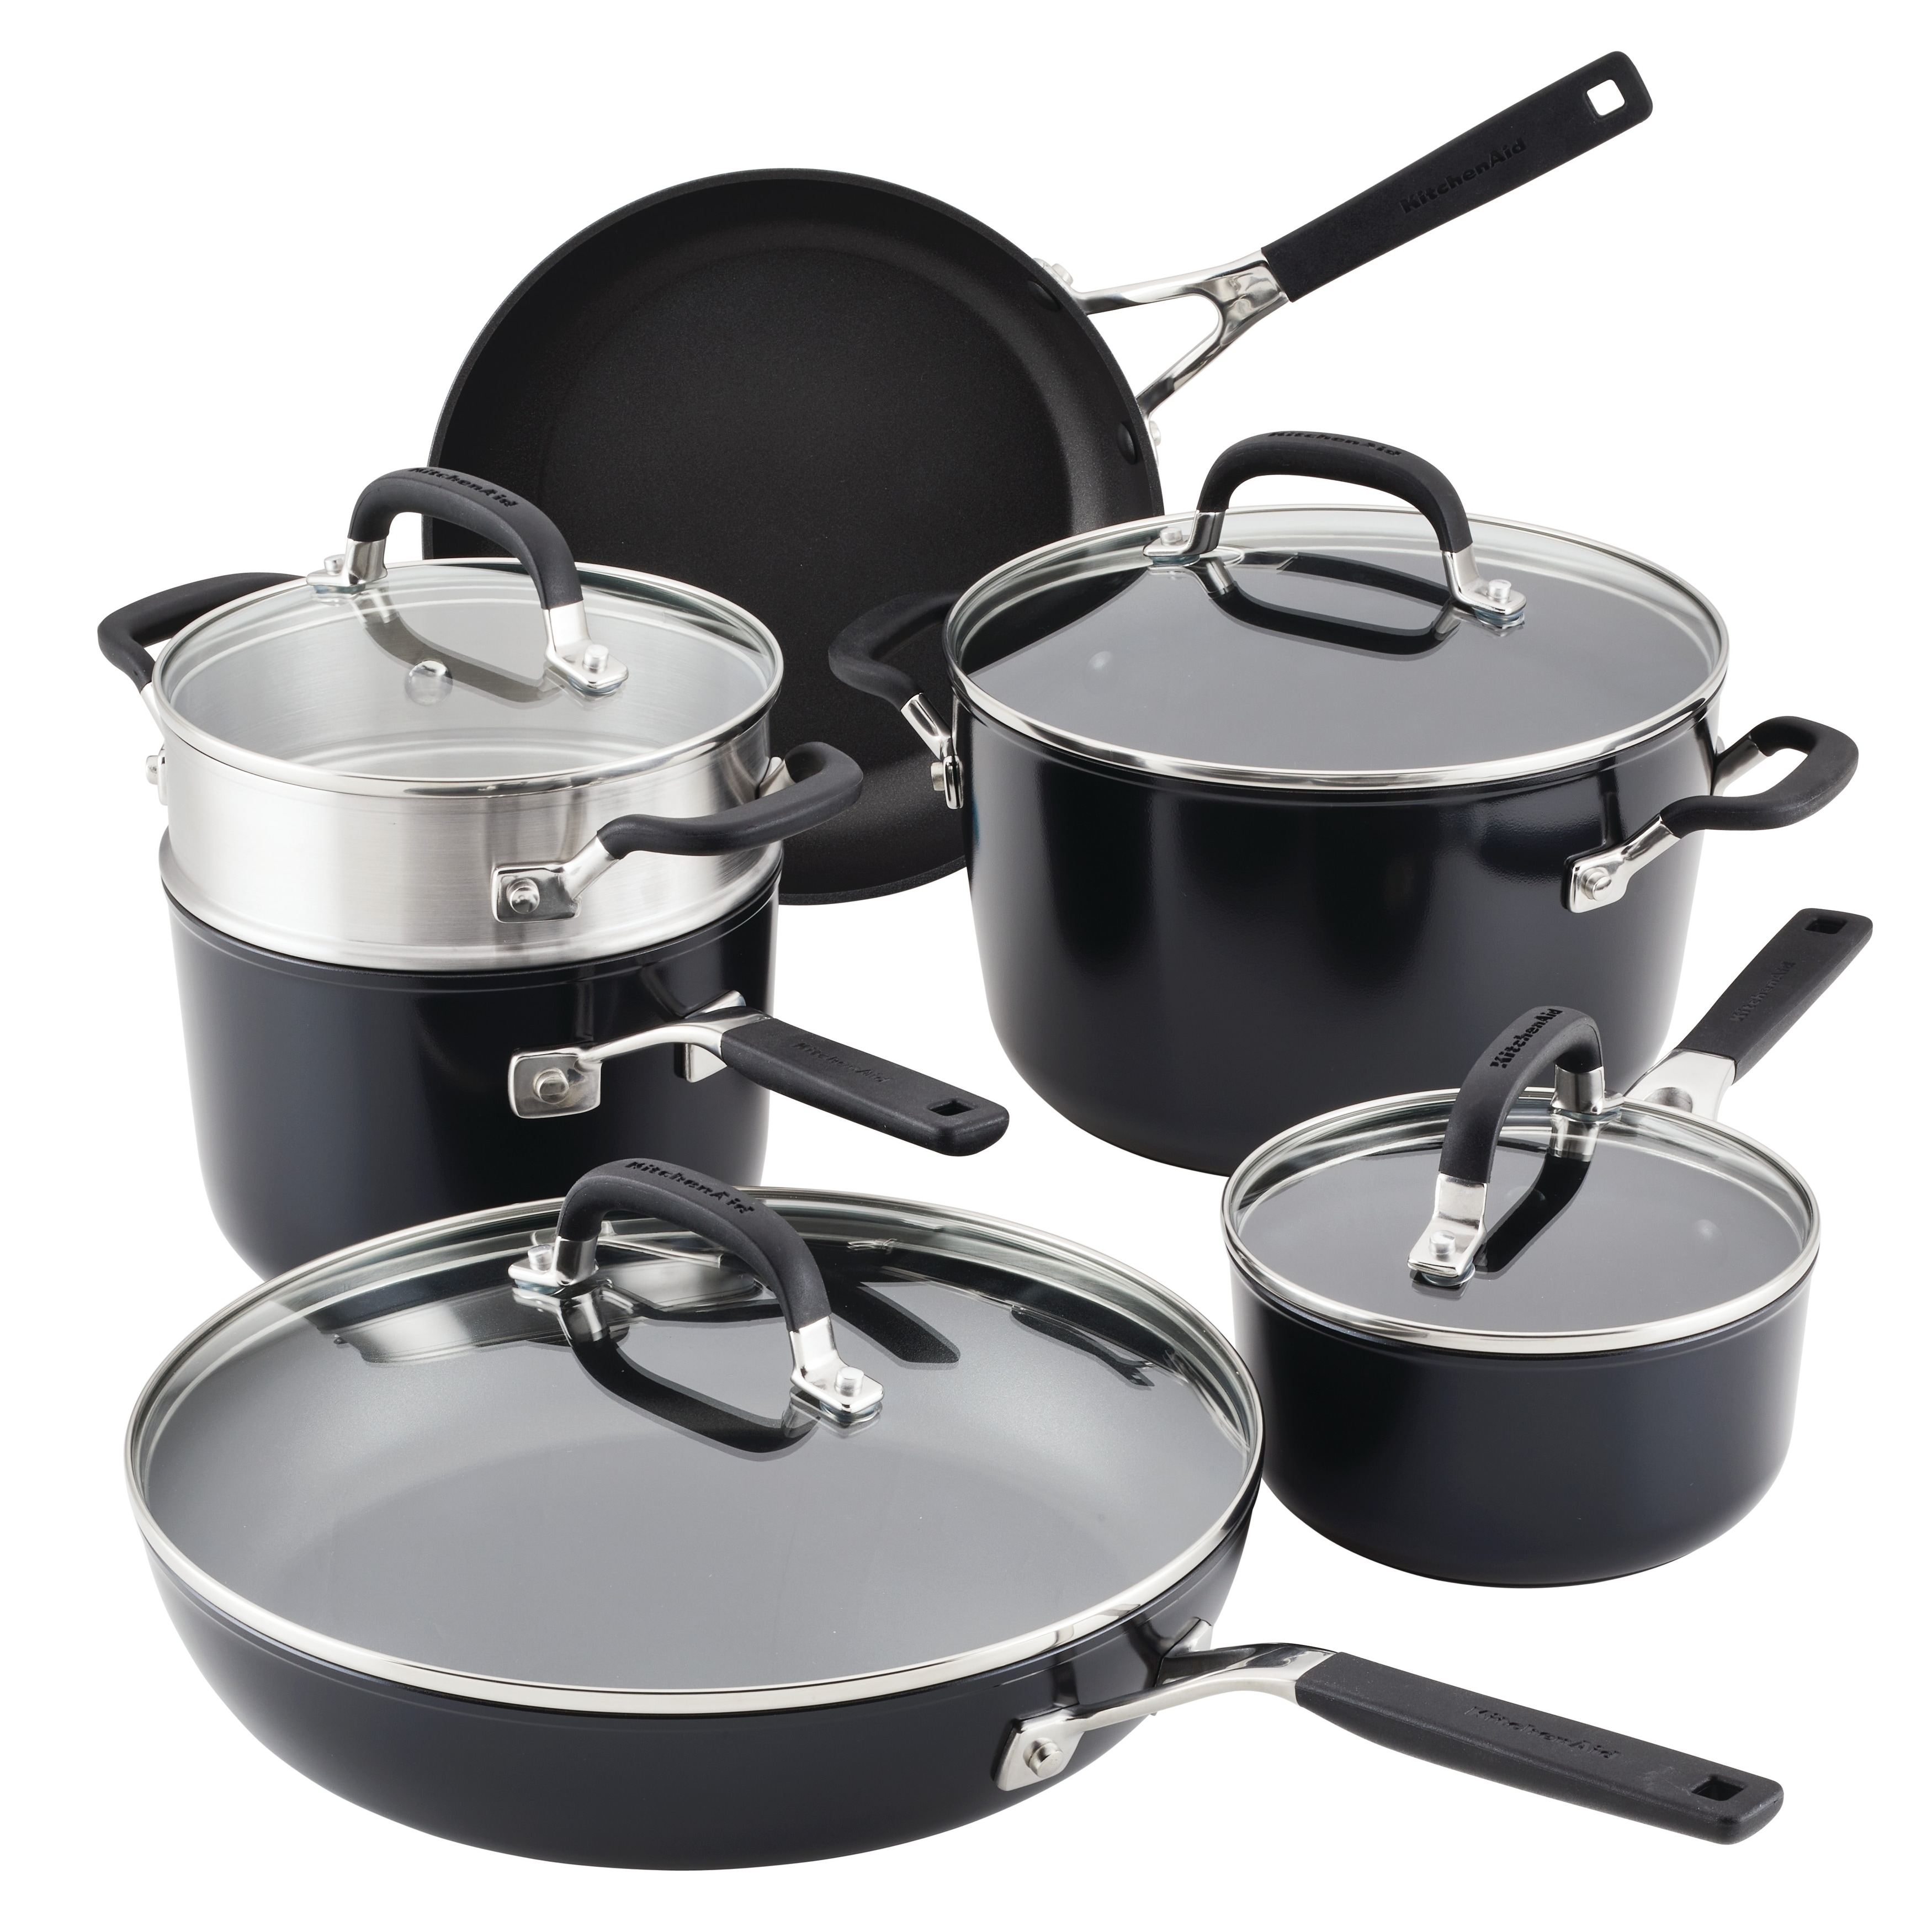 https://ak1.ostkcdn.com/images/products/is/images/direct/9dc281996fcd874dbef0440118d85db5d6a2212a/KitchenAid-Hard-Anodized-Nonstick-Cookware-Pots-and-Pans-Set%2C-10-Piece%2C-Onyx-Black.jpg